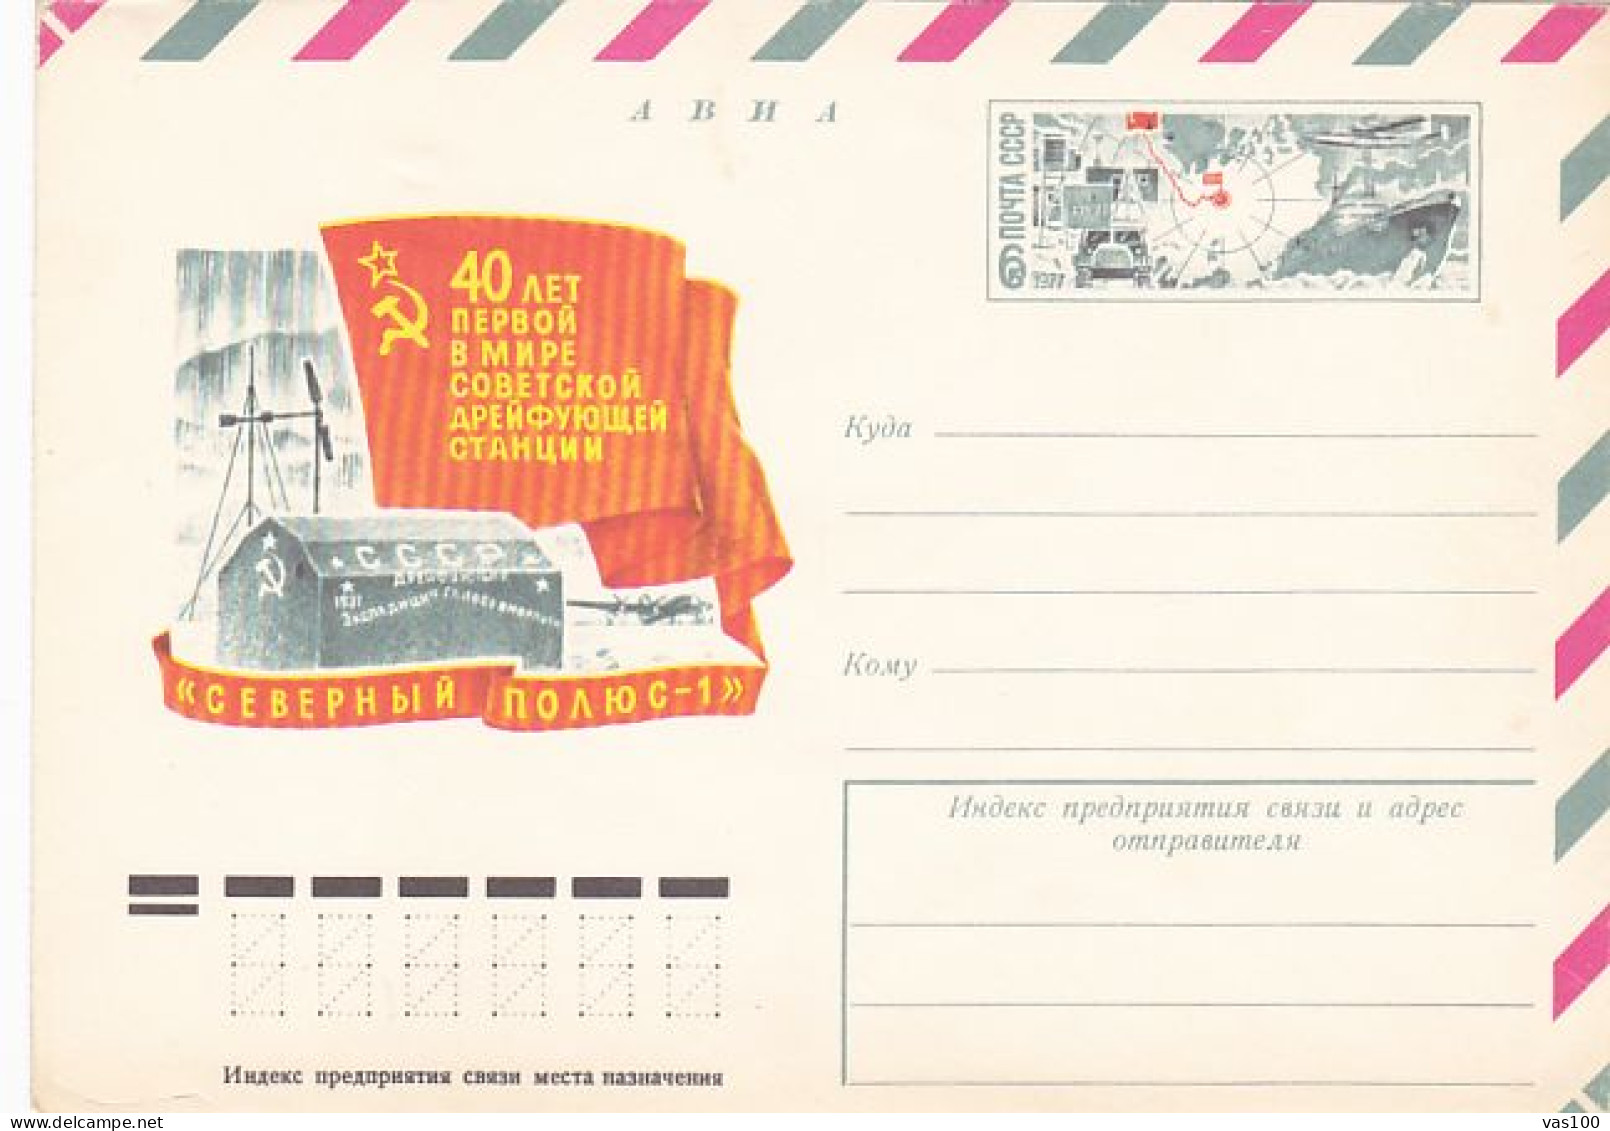 NORTH POLE, RUSSIAN NORTH POLE 1 REASERCH STATION, COVER STATIONERY, ENTIER POSTAL, 1977, RUSSIA - Stations Scientifiques & Stations Dérivantes Arctiques